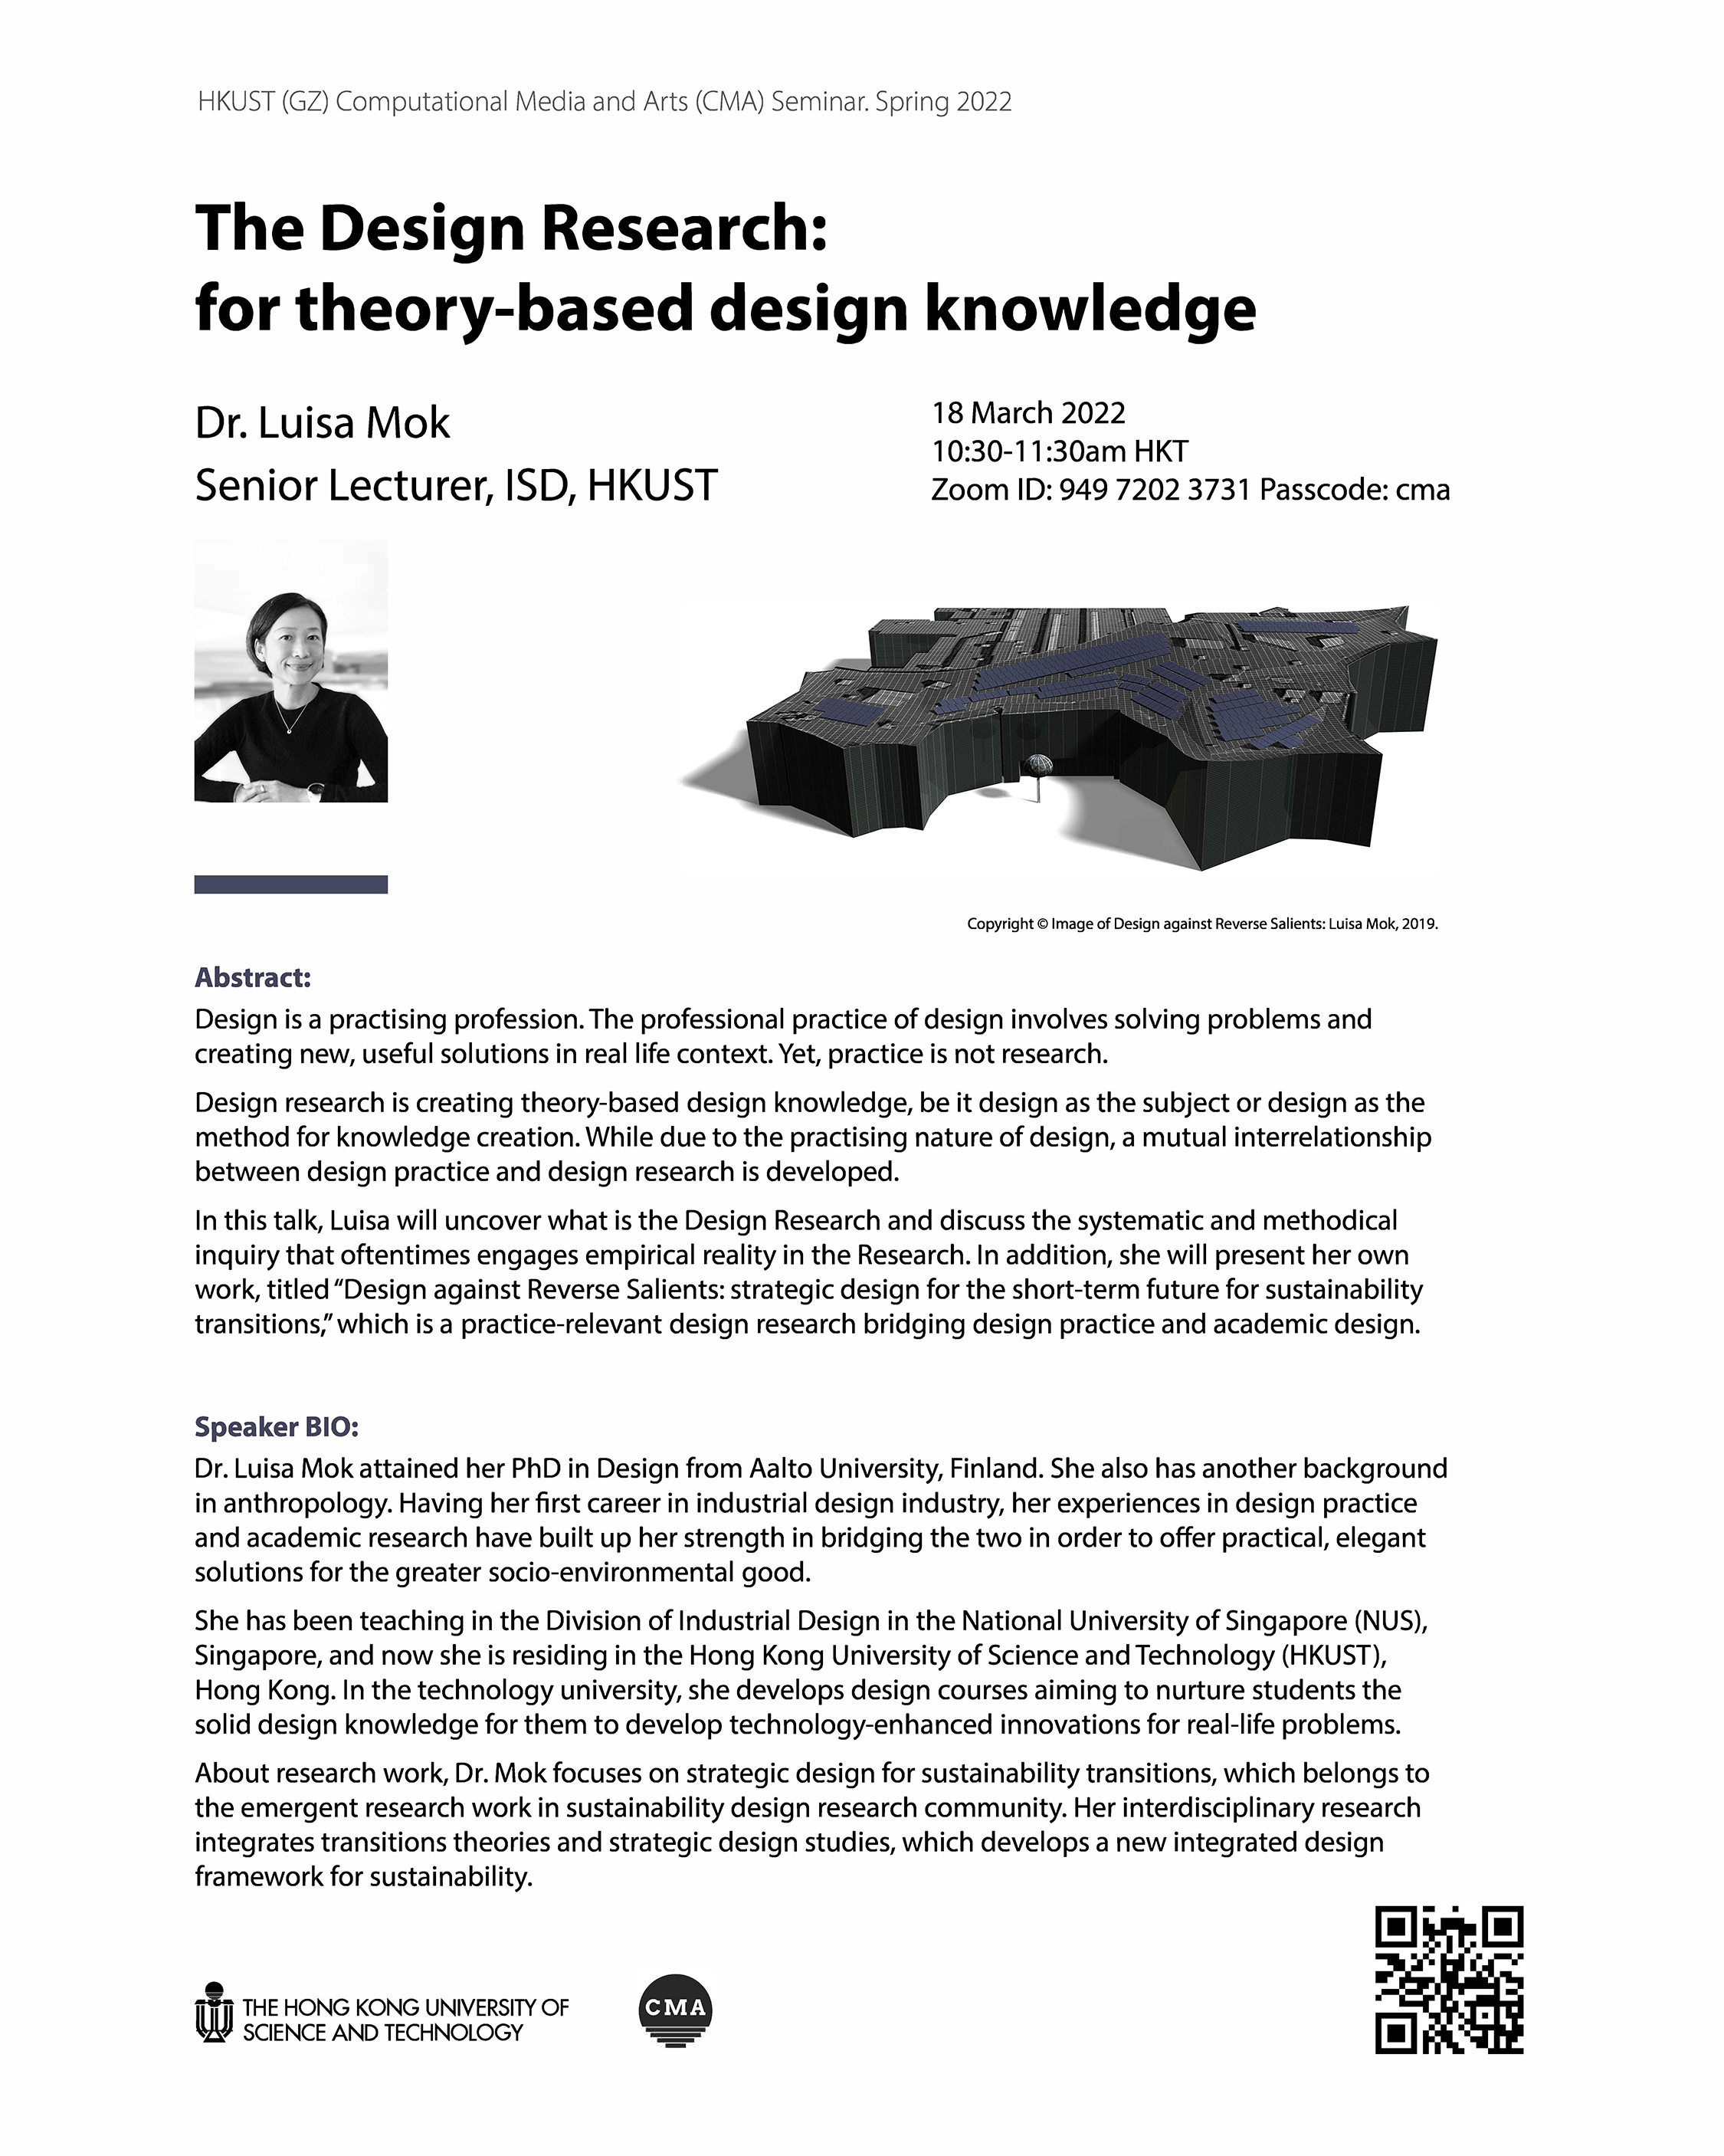 The Design Research: for theory-based design knowledge